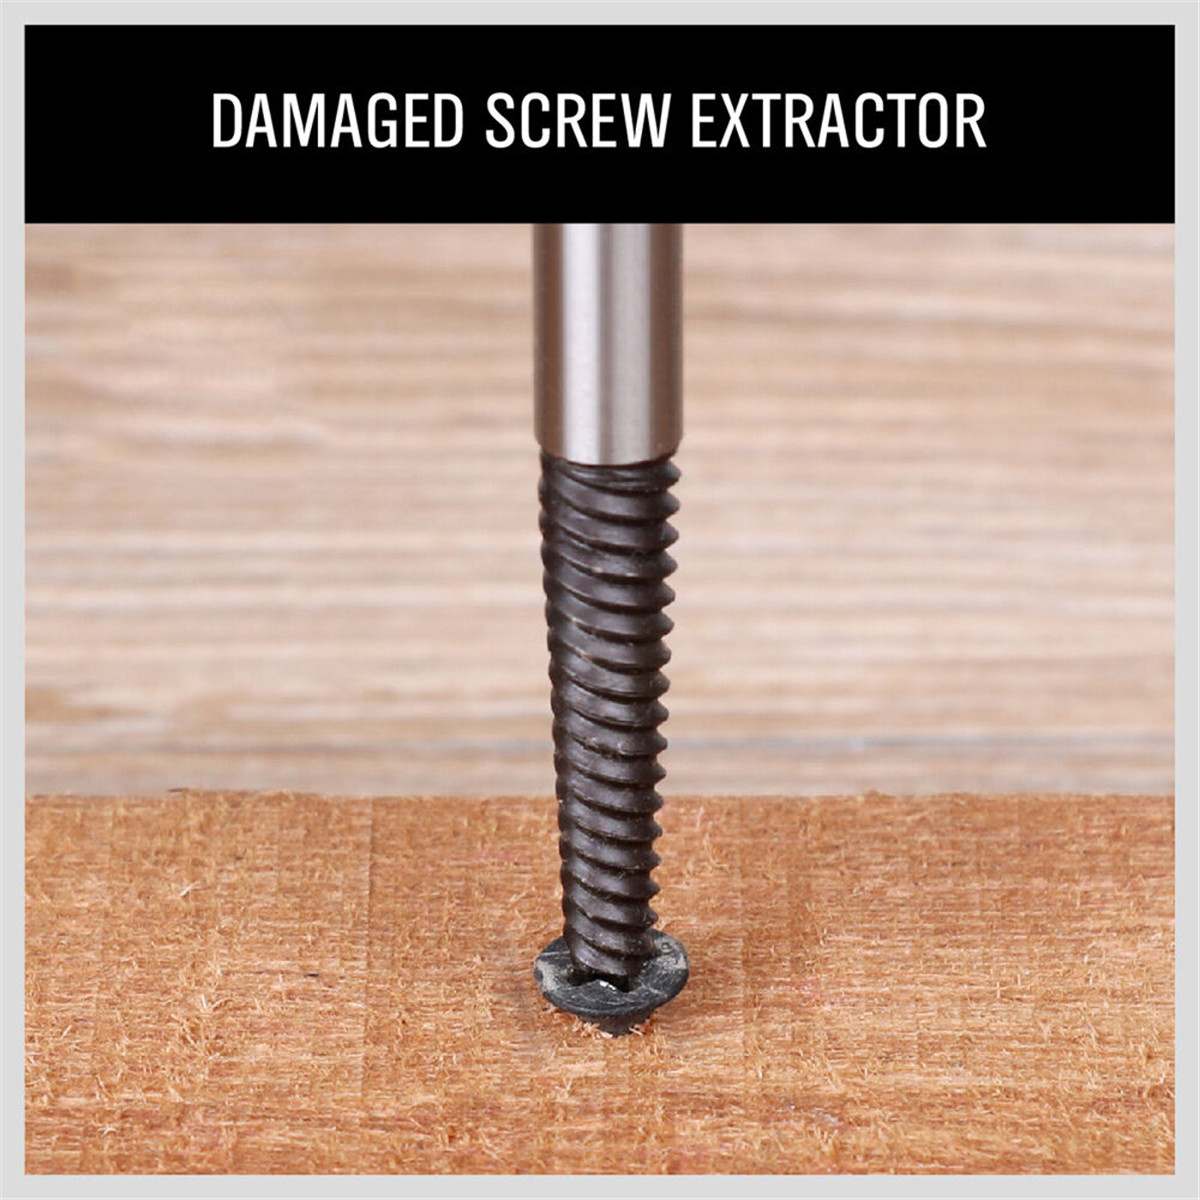 6Pcs/set Steel Damaged Screw Extractor Drill Bit Broken Speed Out Guide Set Broken Bolt Remover Easy Out Power Tool Accessories